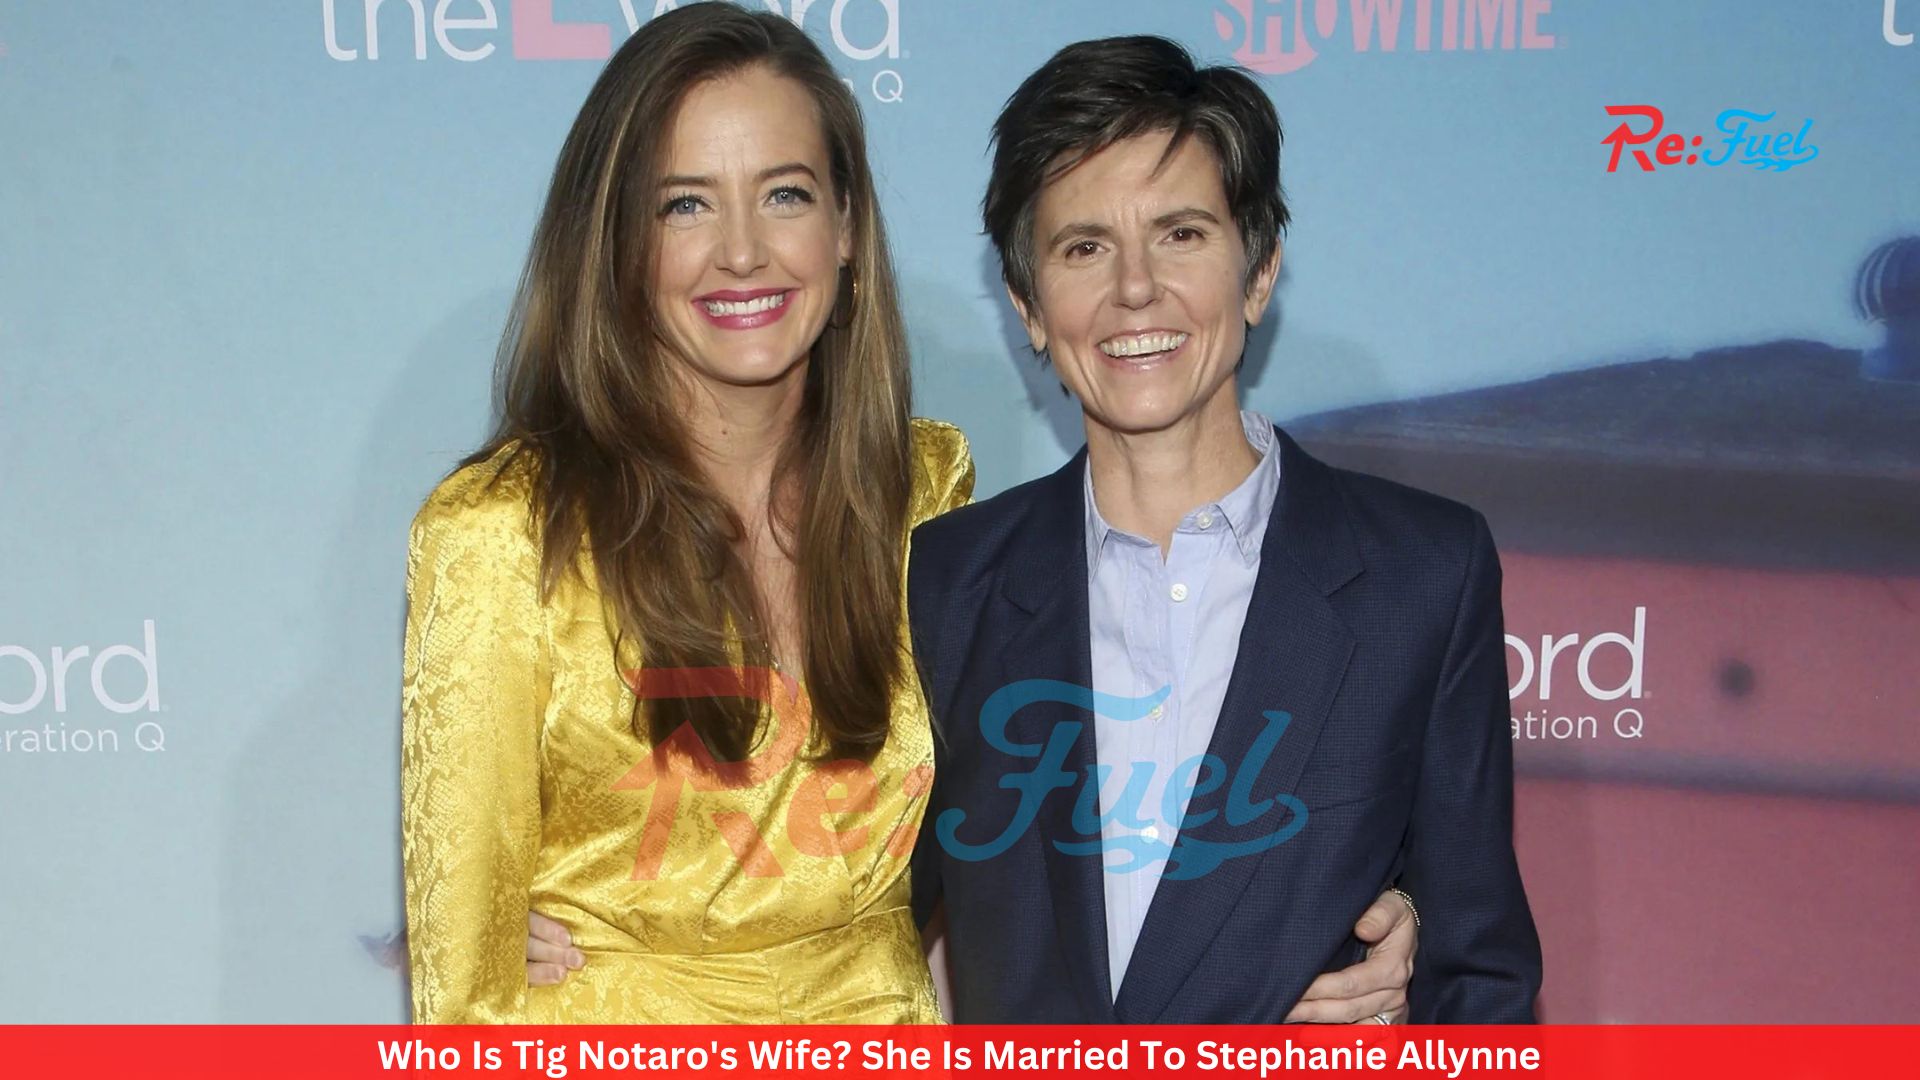 Who Is Tig Notaro's Wife? She Is Married To Stephanie Allynne